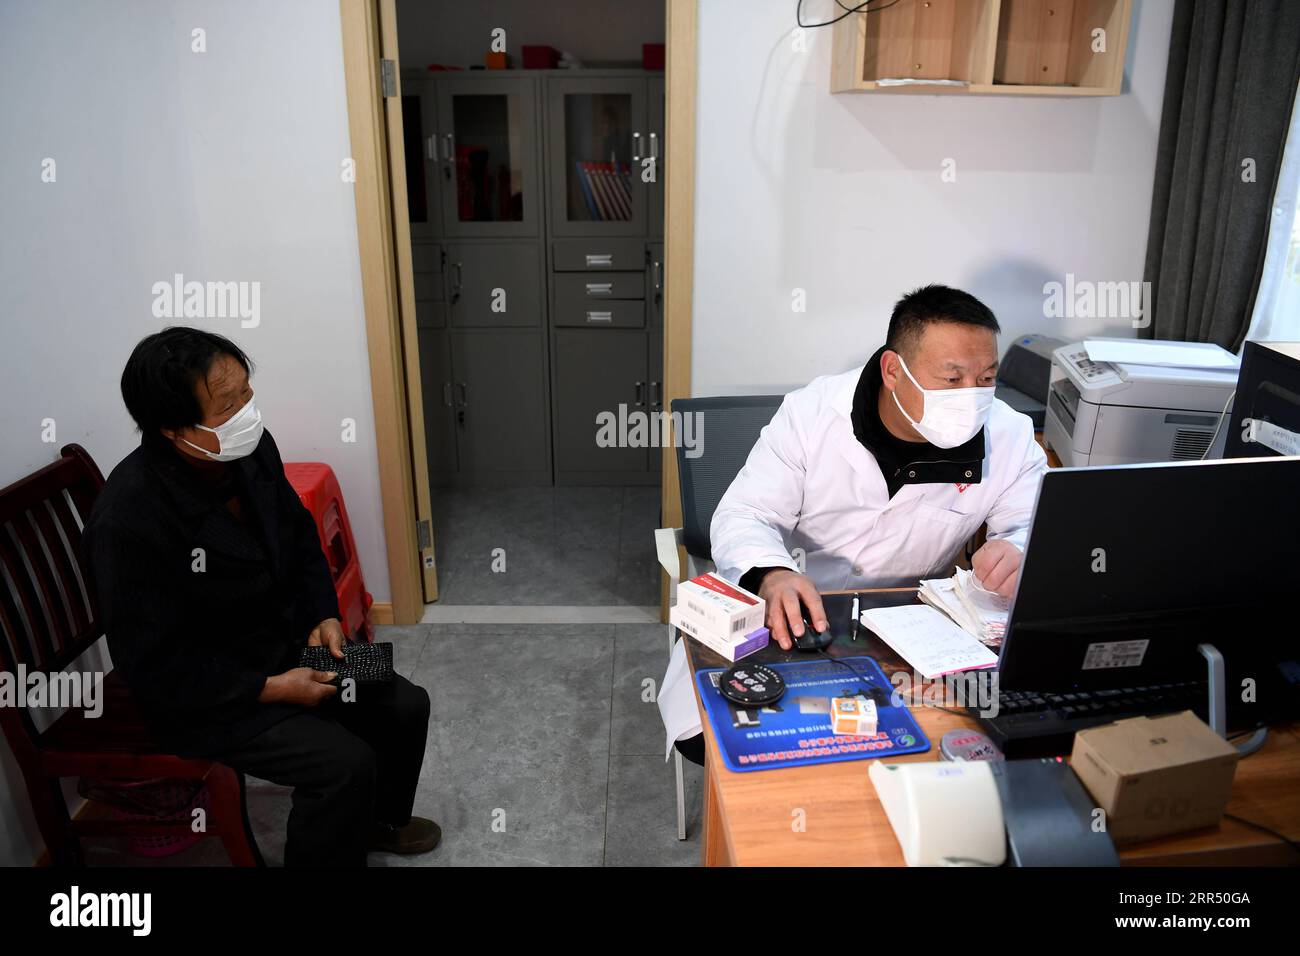 201218 -- JINZHAI, Dec. 18, 2020 -- Yu Jiajun treats a villager at the new health station in Jinzhai County of Luan City, east China s Anhui Province, Dec. 15, 2020. Deep in the Xianghongdian Reservoir area in Jinzhai County of Luan City, east China s Anhui Province, there is an isolated island, which used to be home to over 40 poor families. Yu Jiajun, 42, is the only doctor in the village. In the past, there was no health station on the island. Villagers had to row a boat for two or three hours to go to the health center in Mabu Township to see the doctor. Yu said. When Yu Jiajun returned to Stock Photo